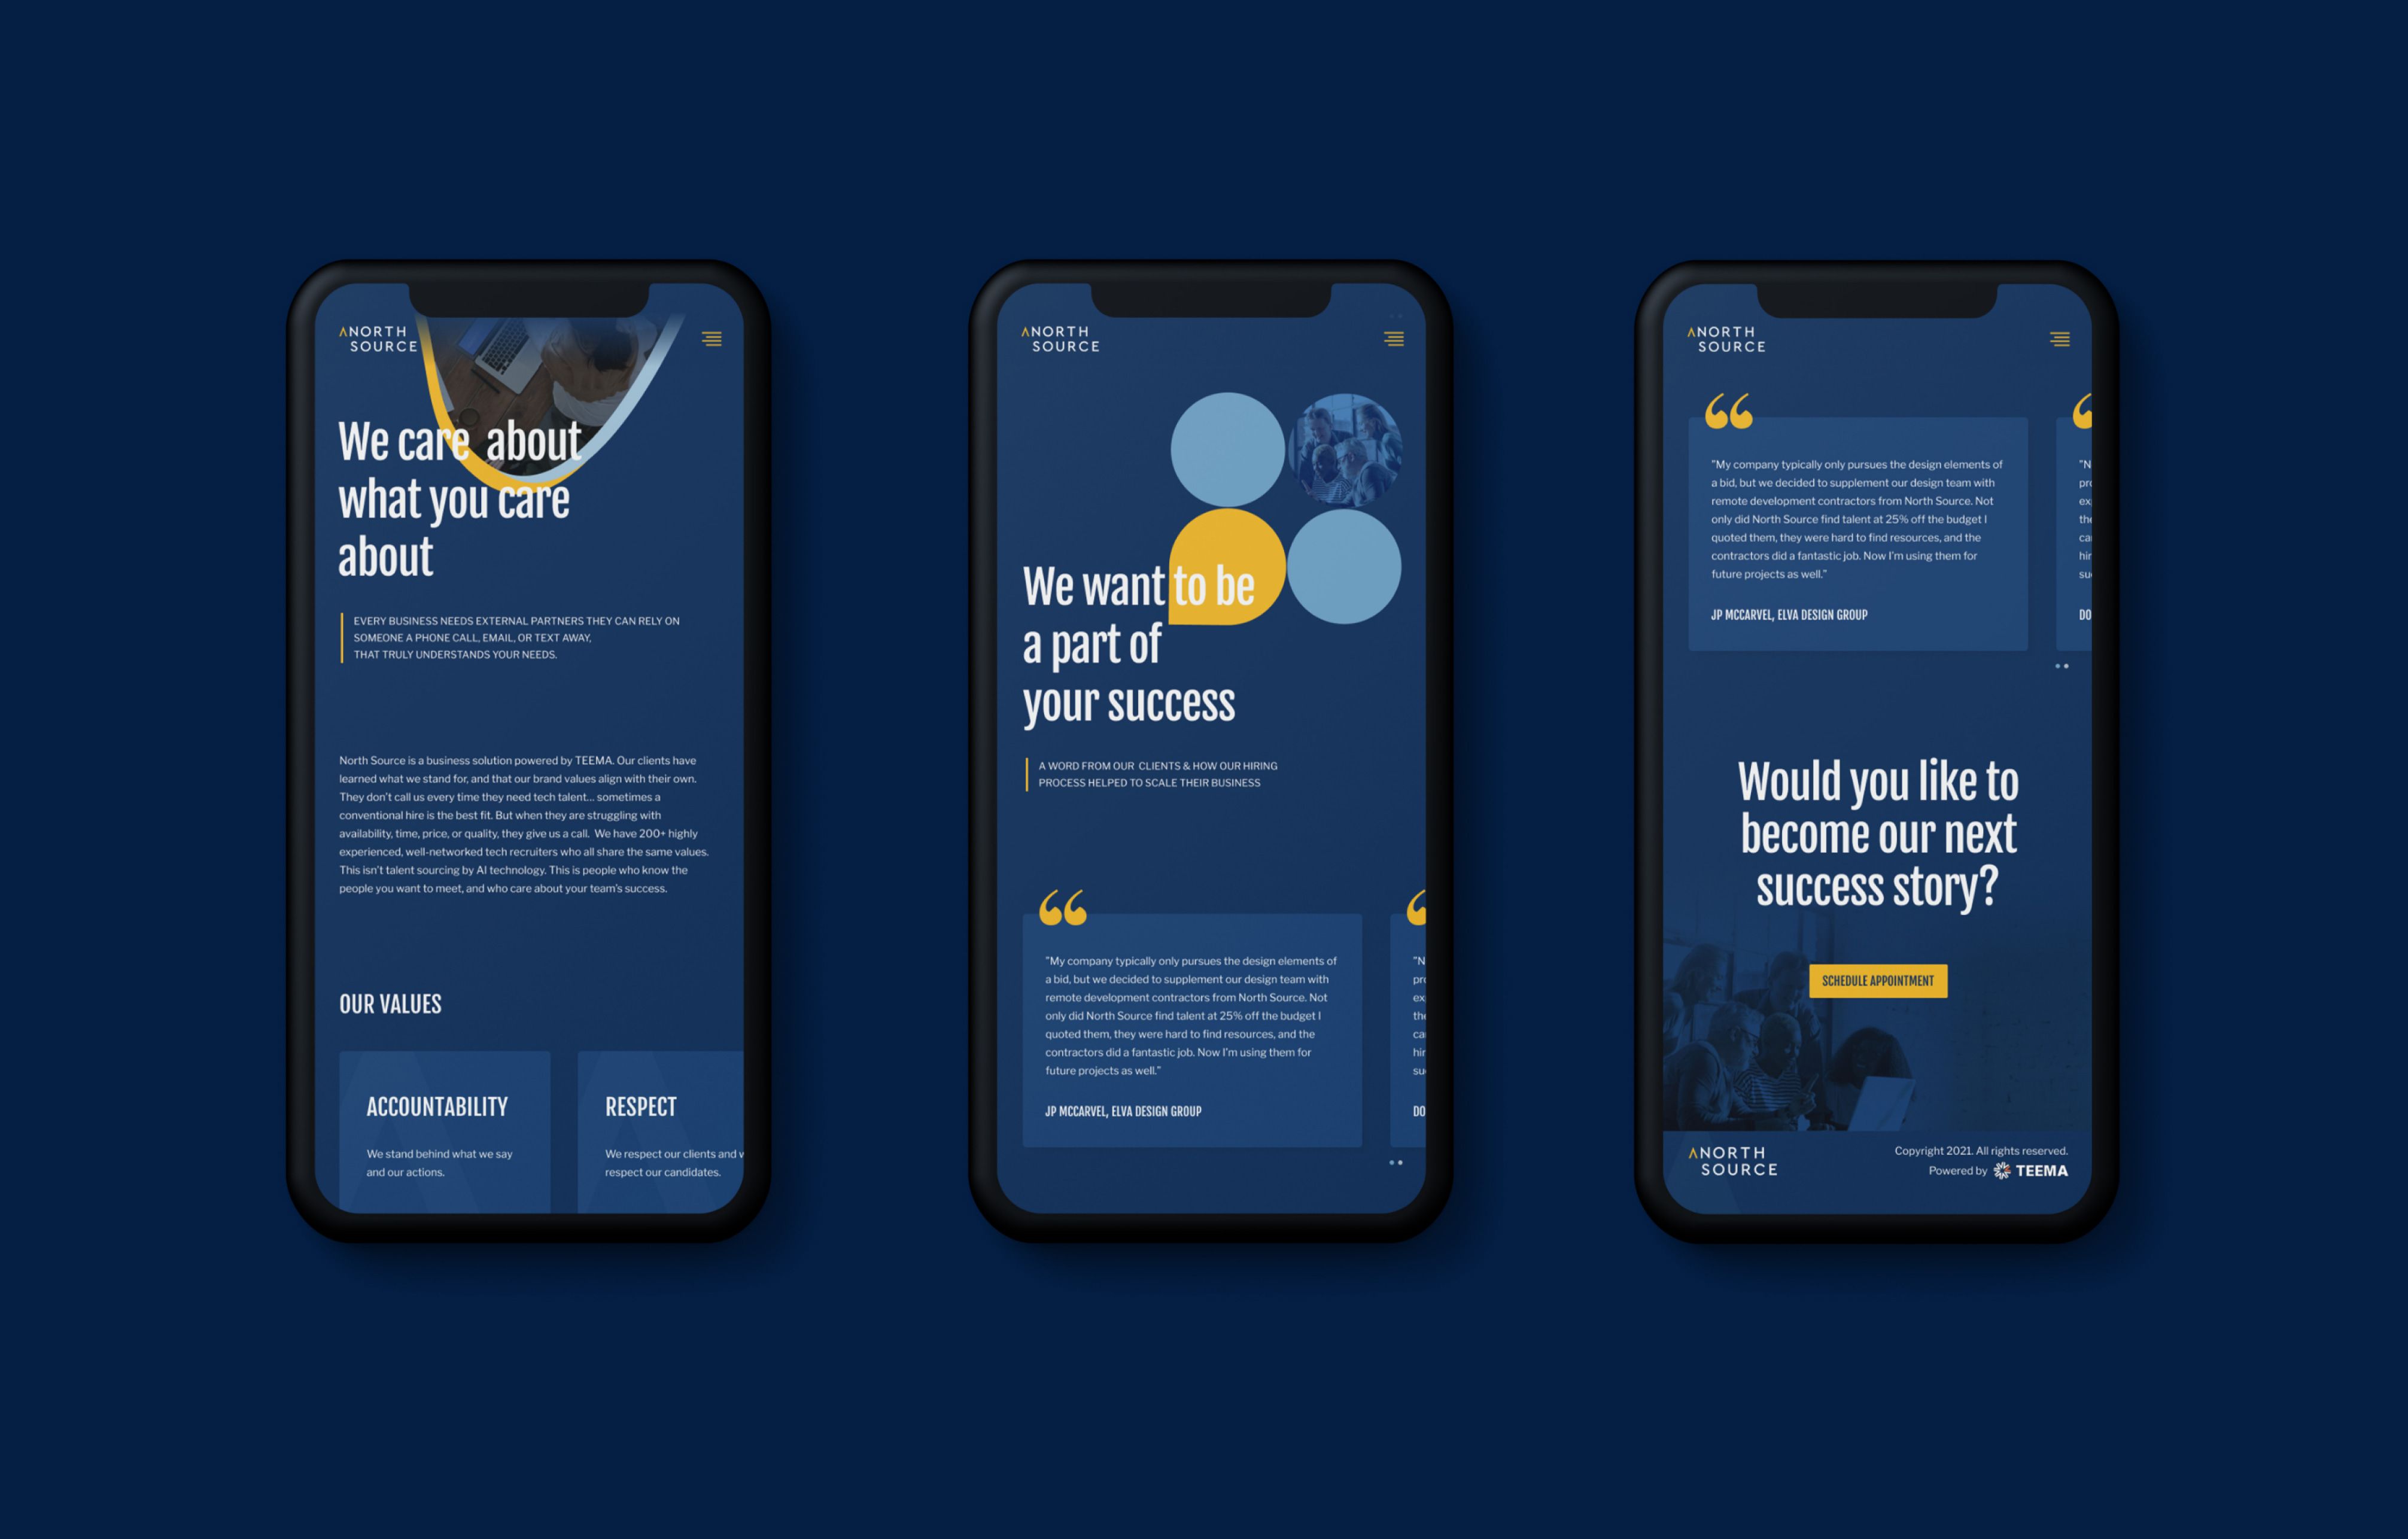 North Source mobile designs : values section, testimonials section and cta section